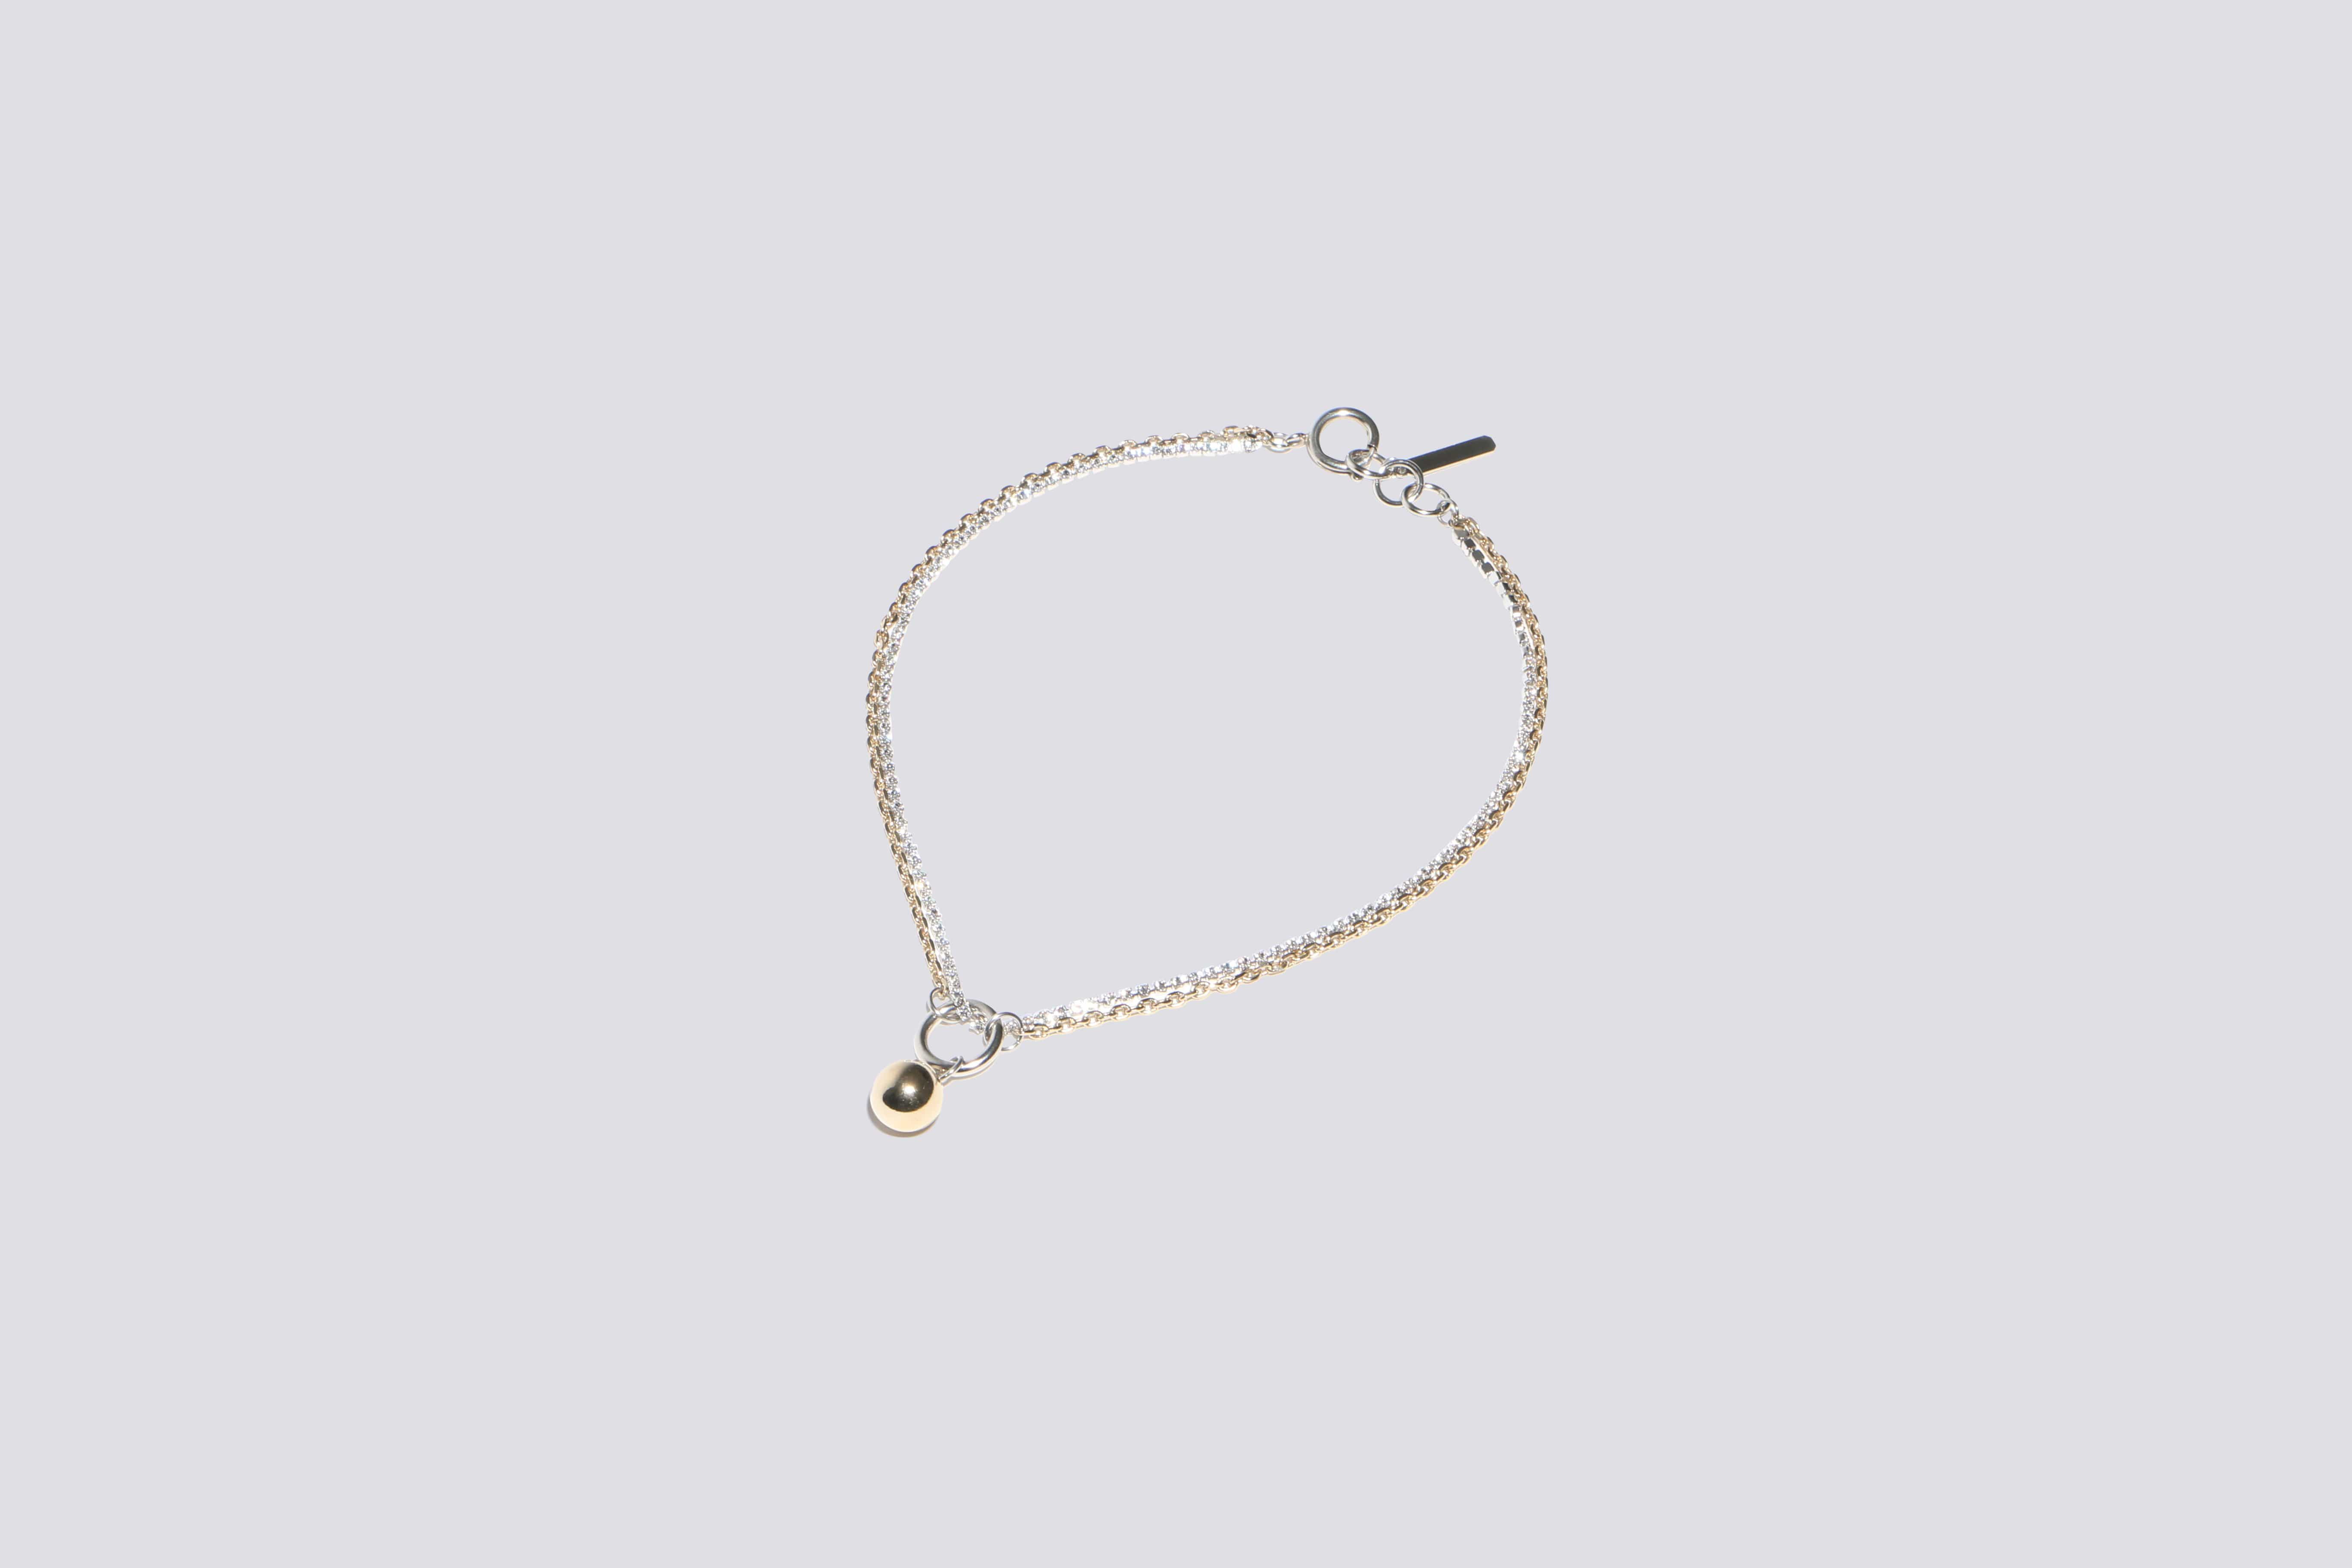 Justine Clenquet - Mindy multicolor choker